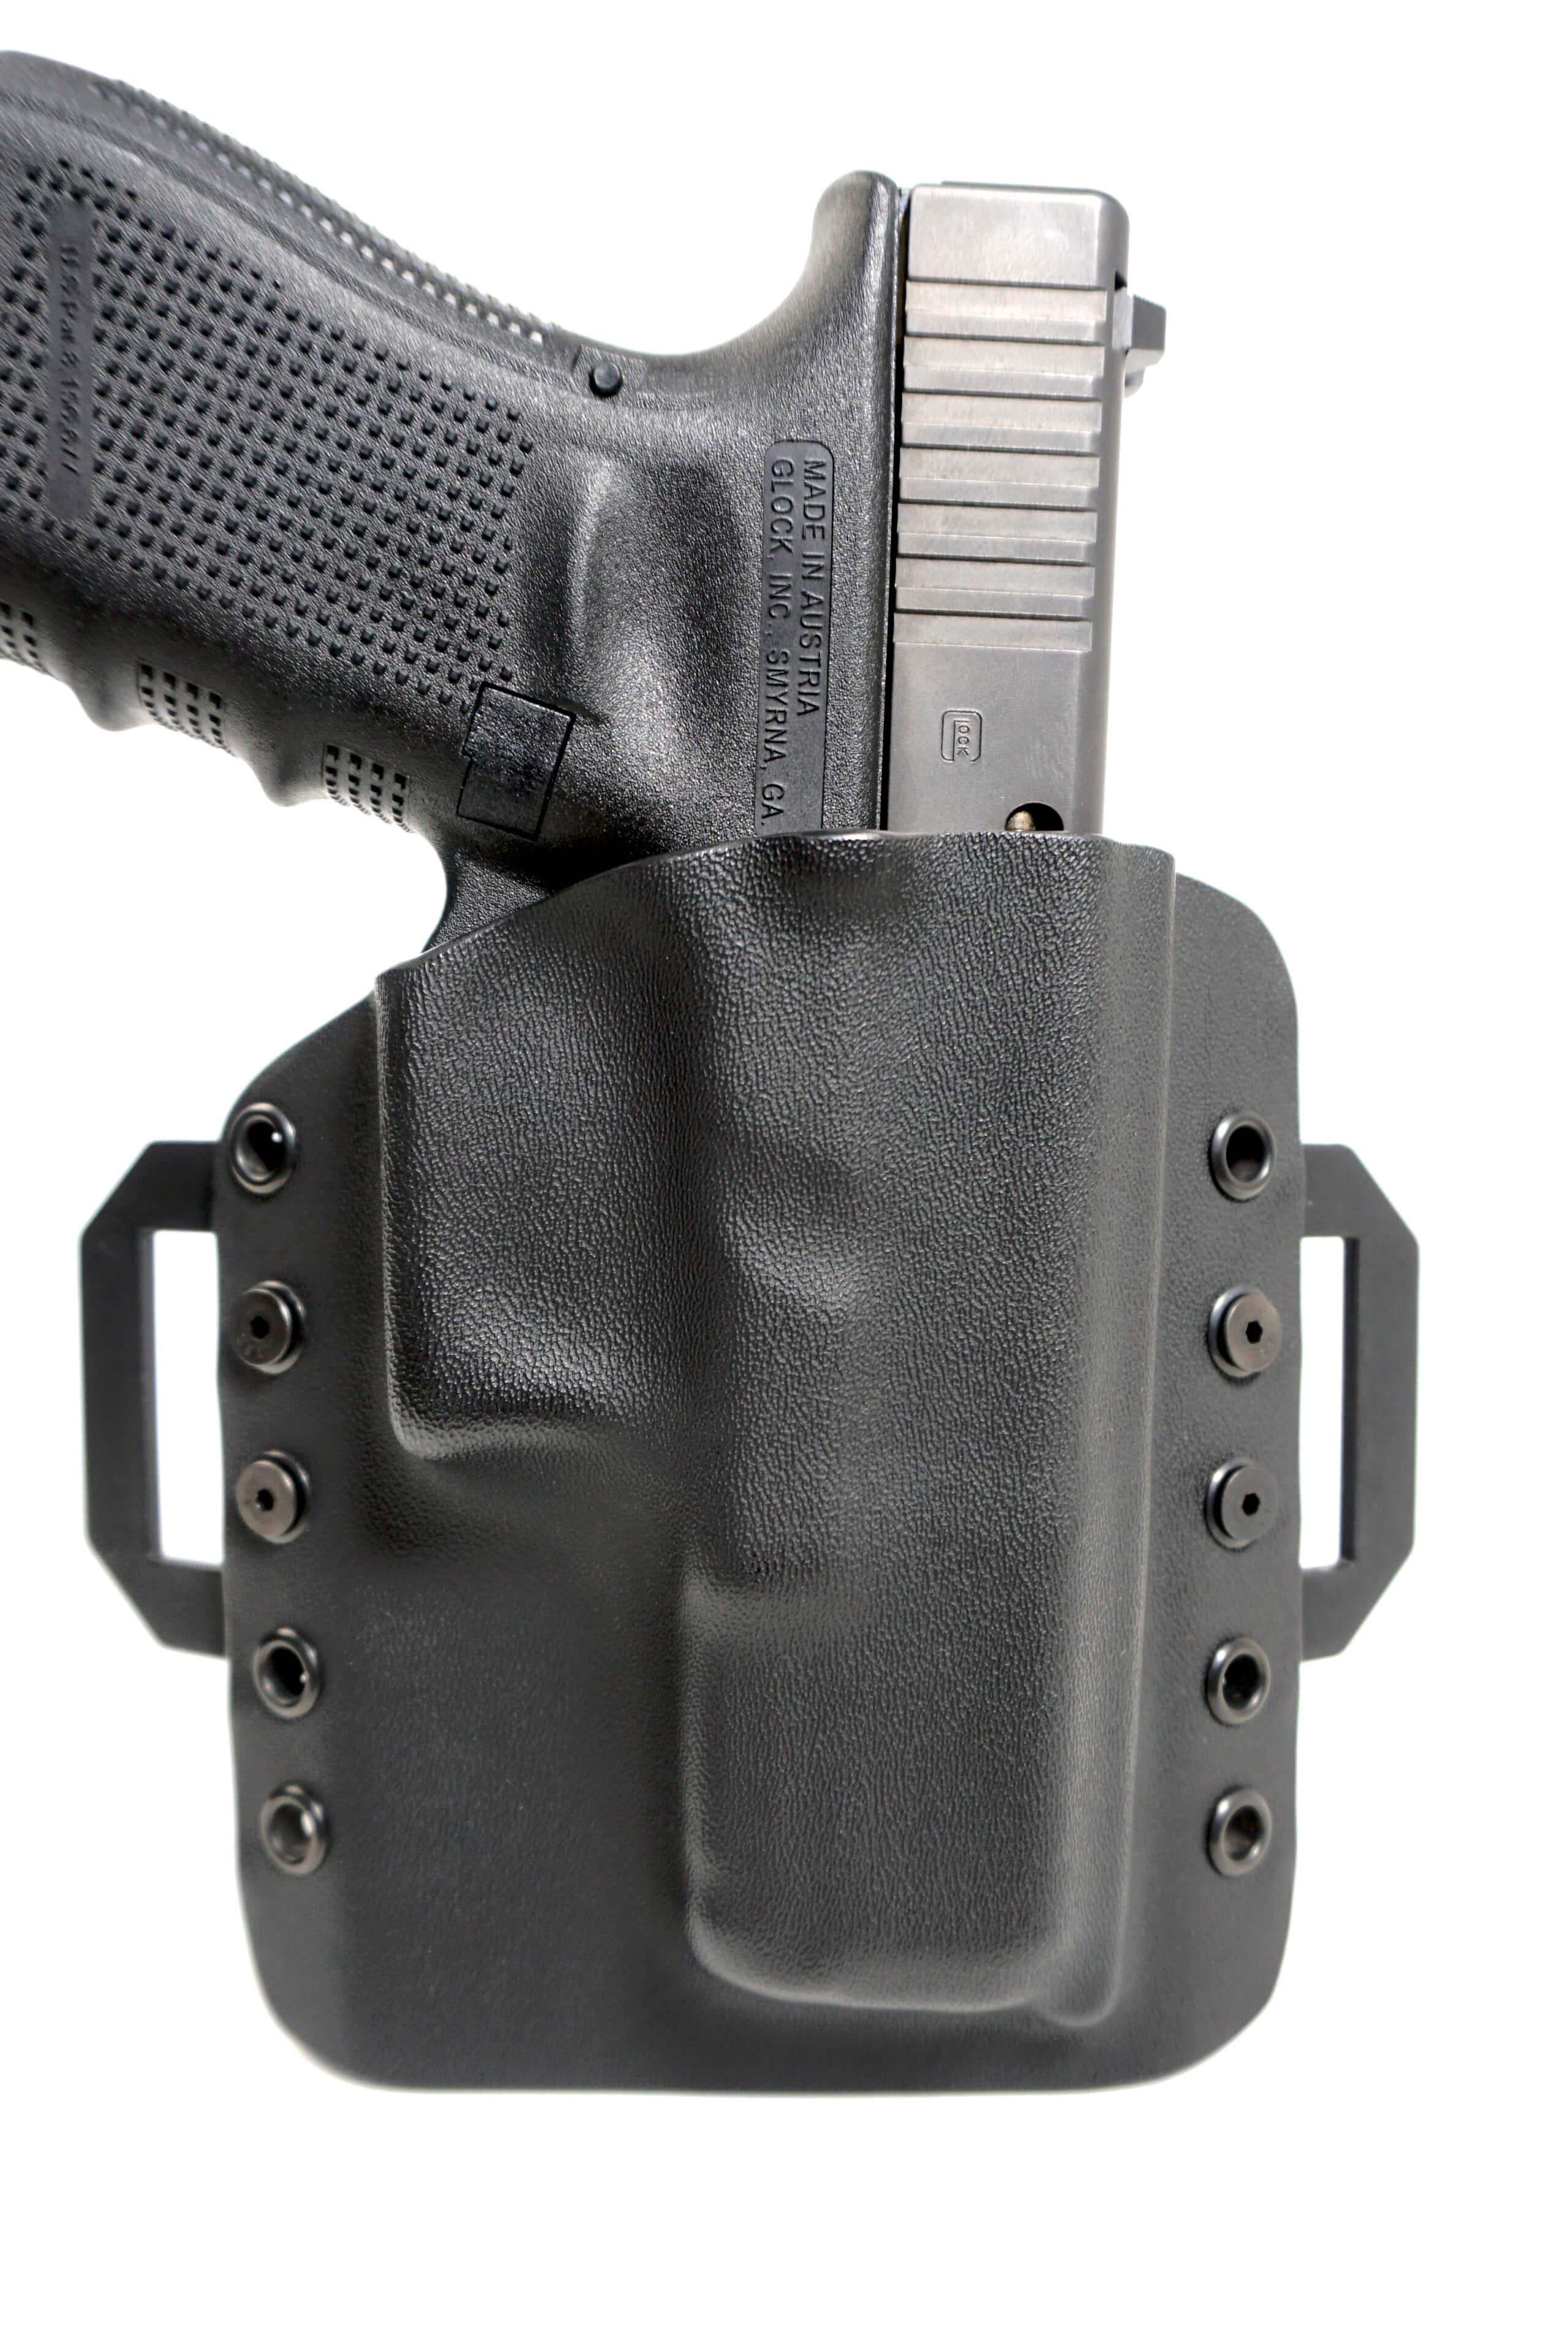 KYDEX HOLSTER COMPATIBLE WITH FN 509 BLACK OWB 